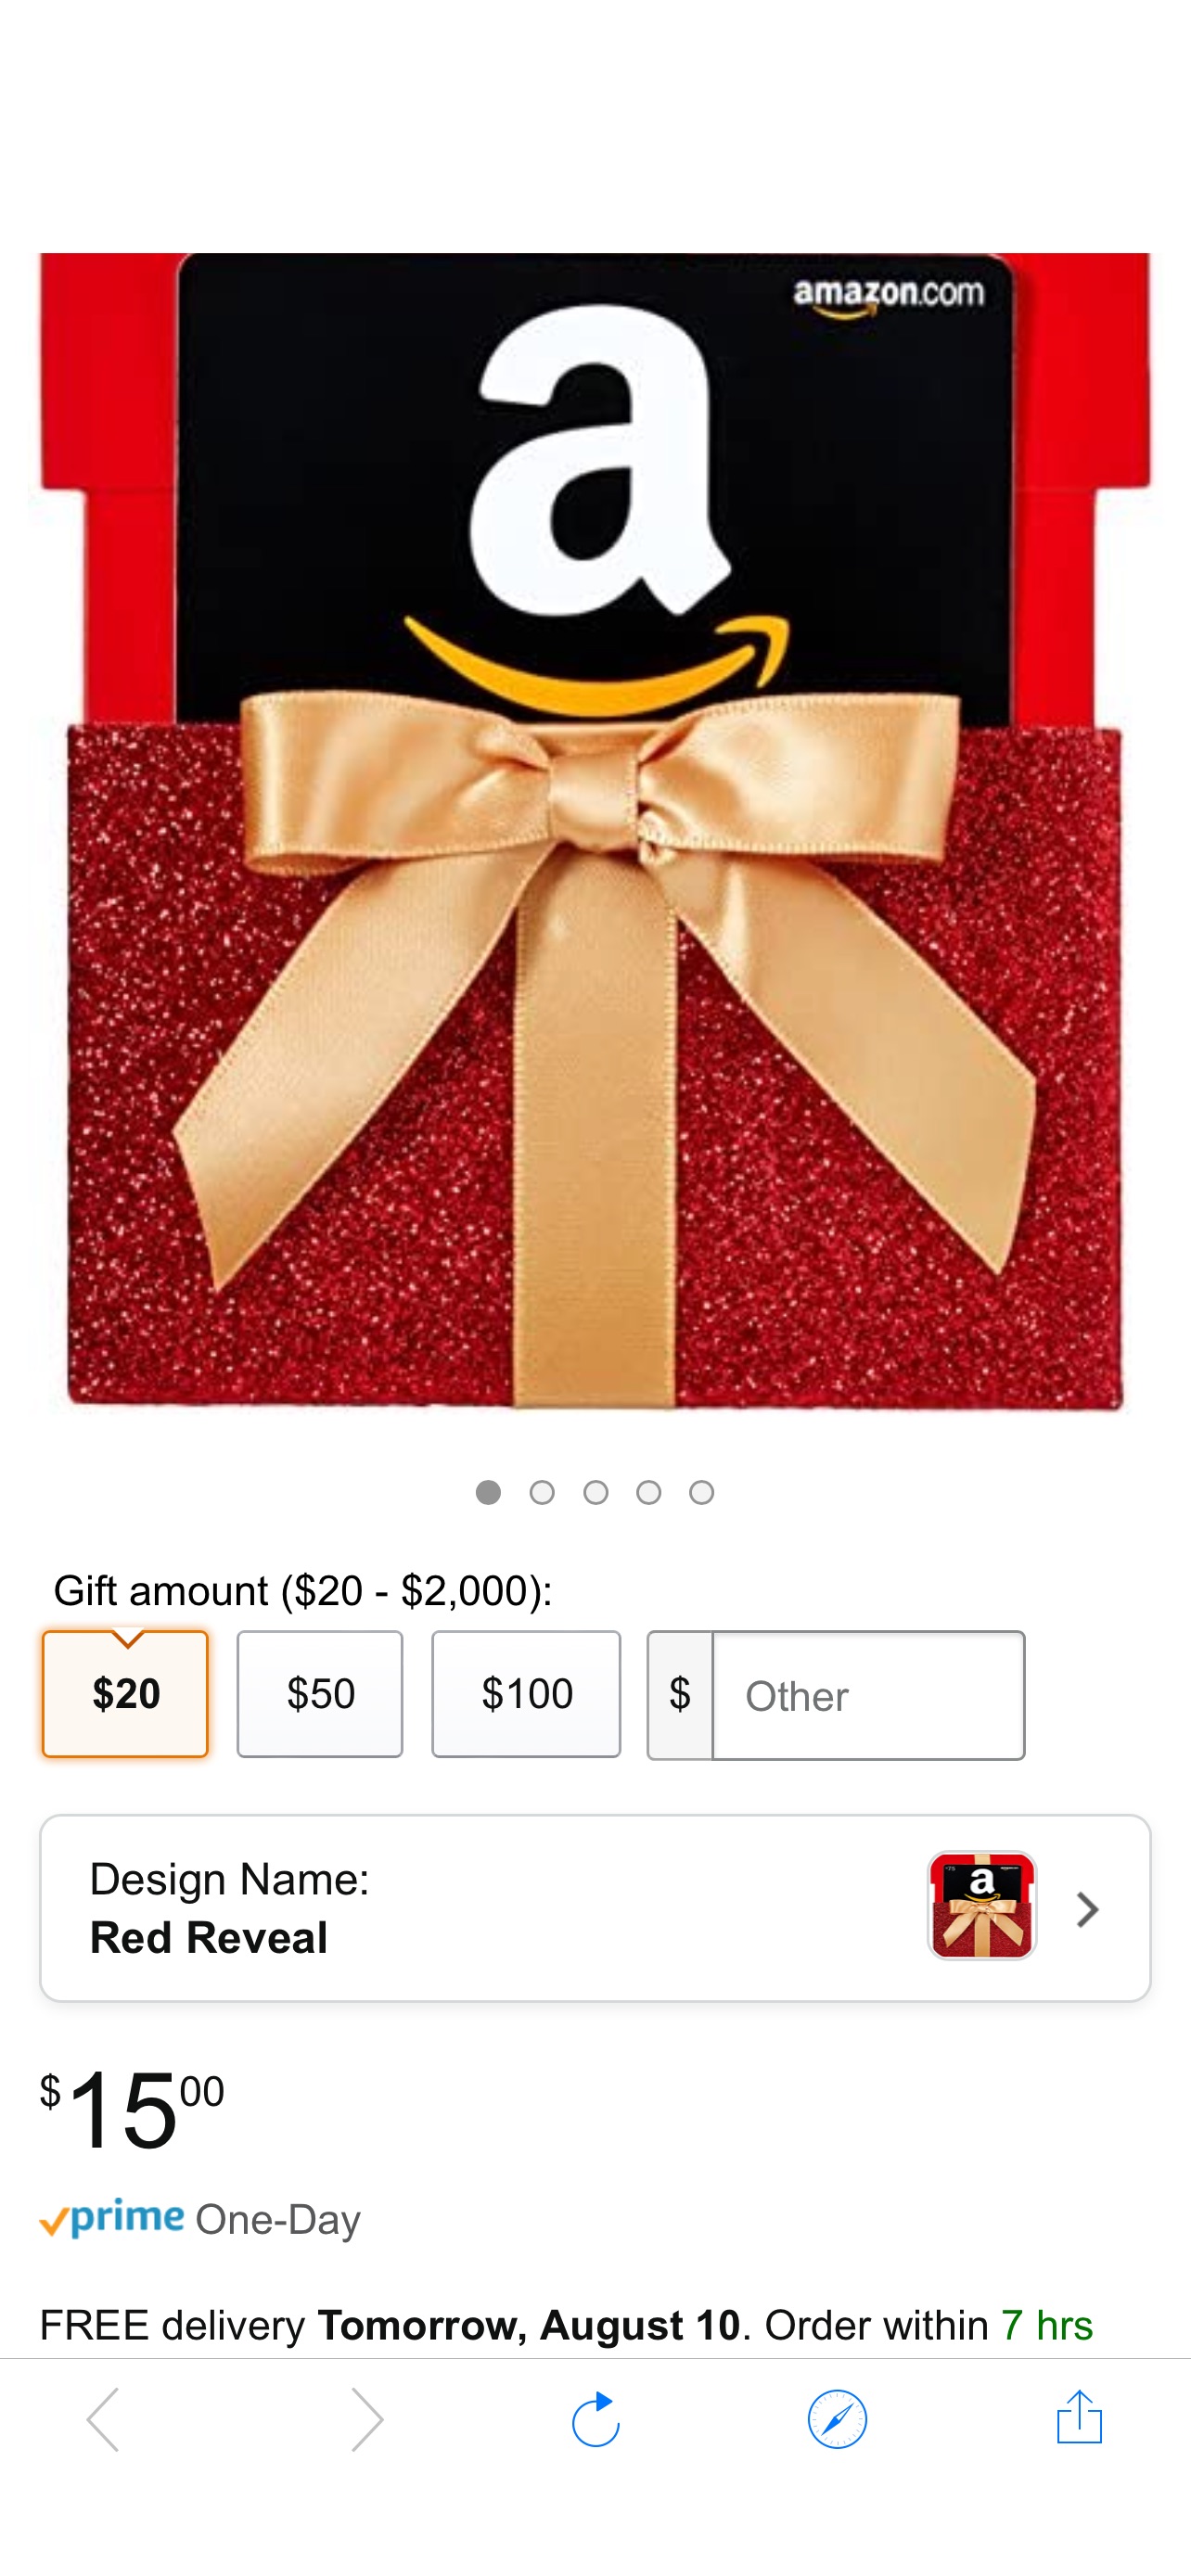 Amazon.com: Amazon.com Gift Card in a Gift Box Reveal (Classic Black Card Design) : Gift Cards